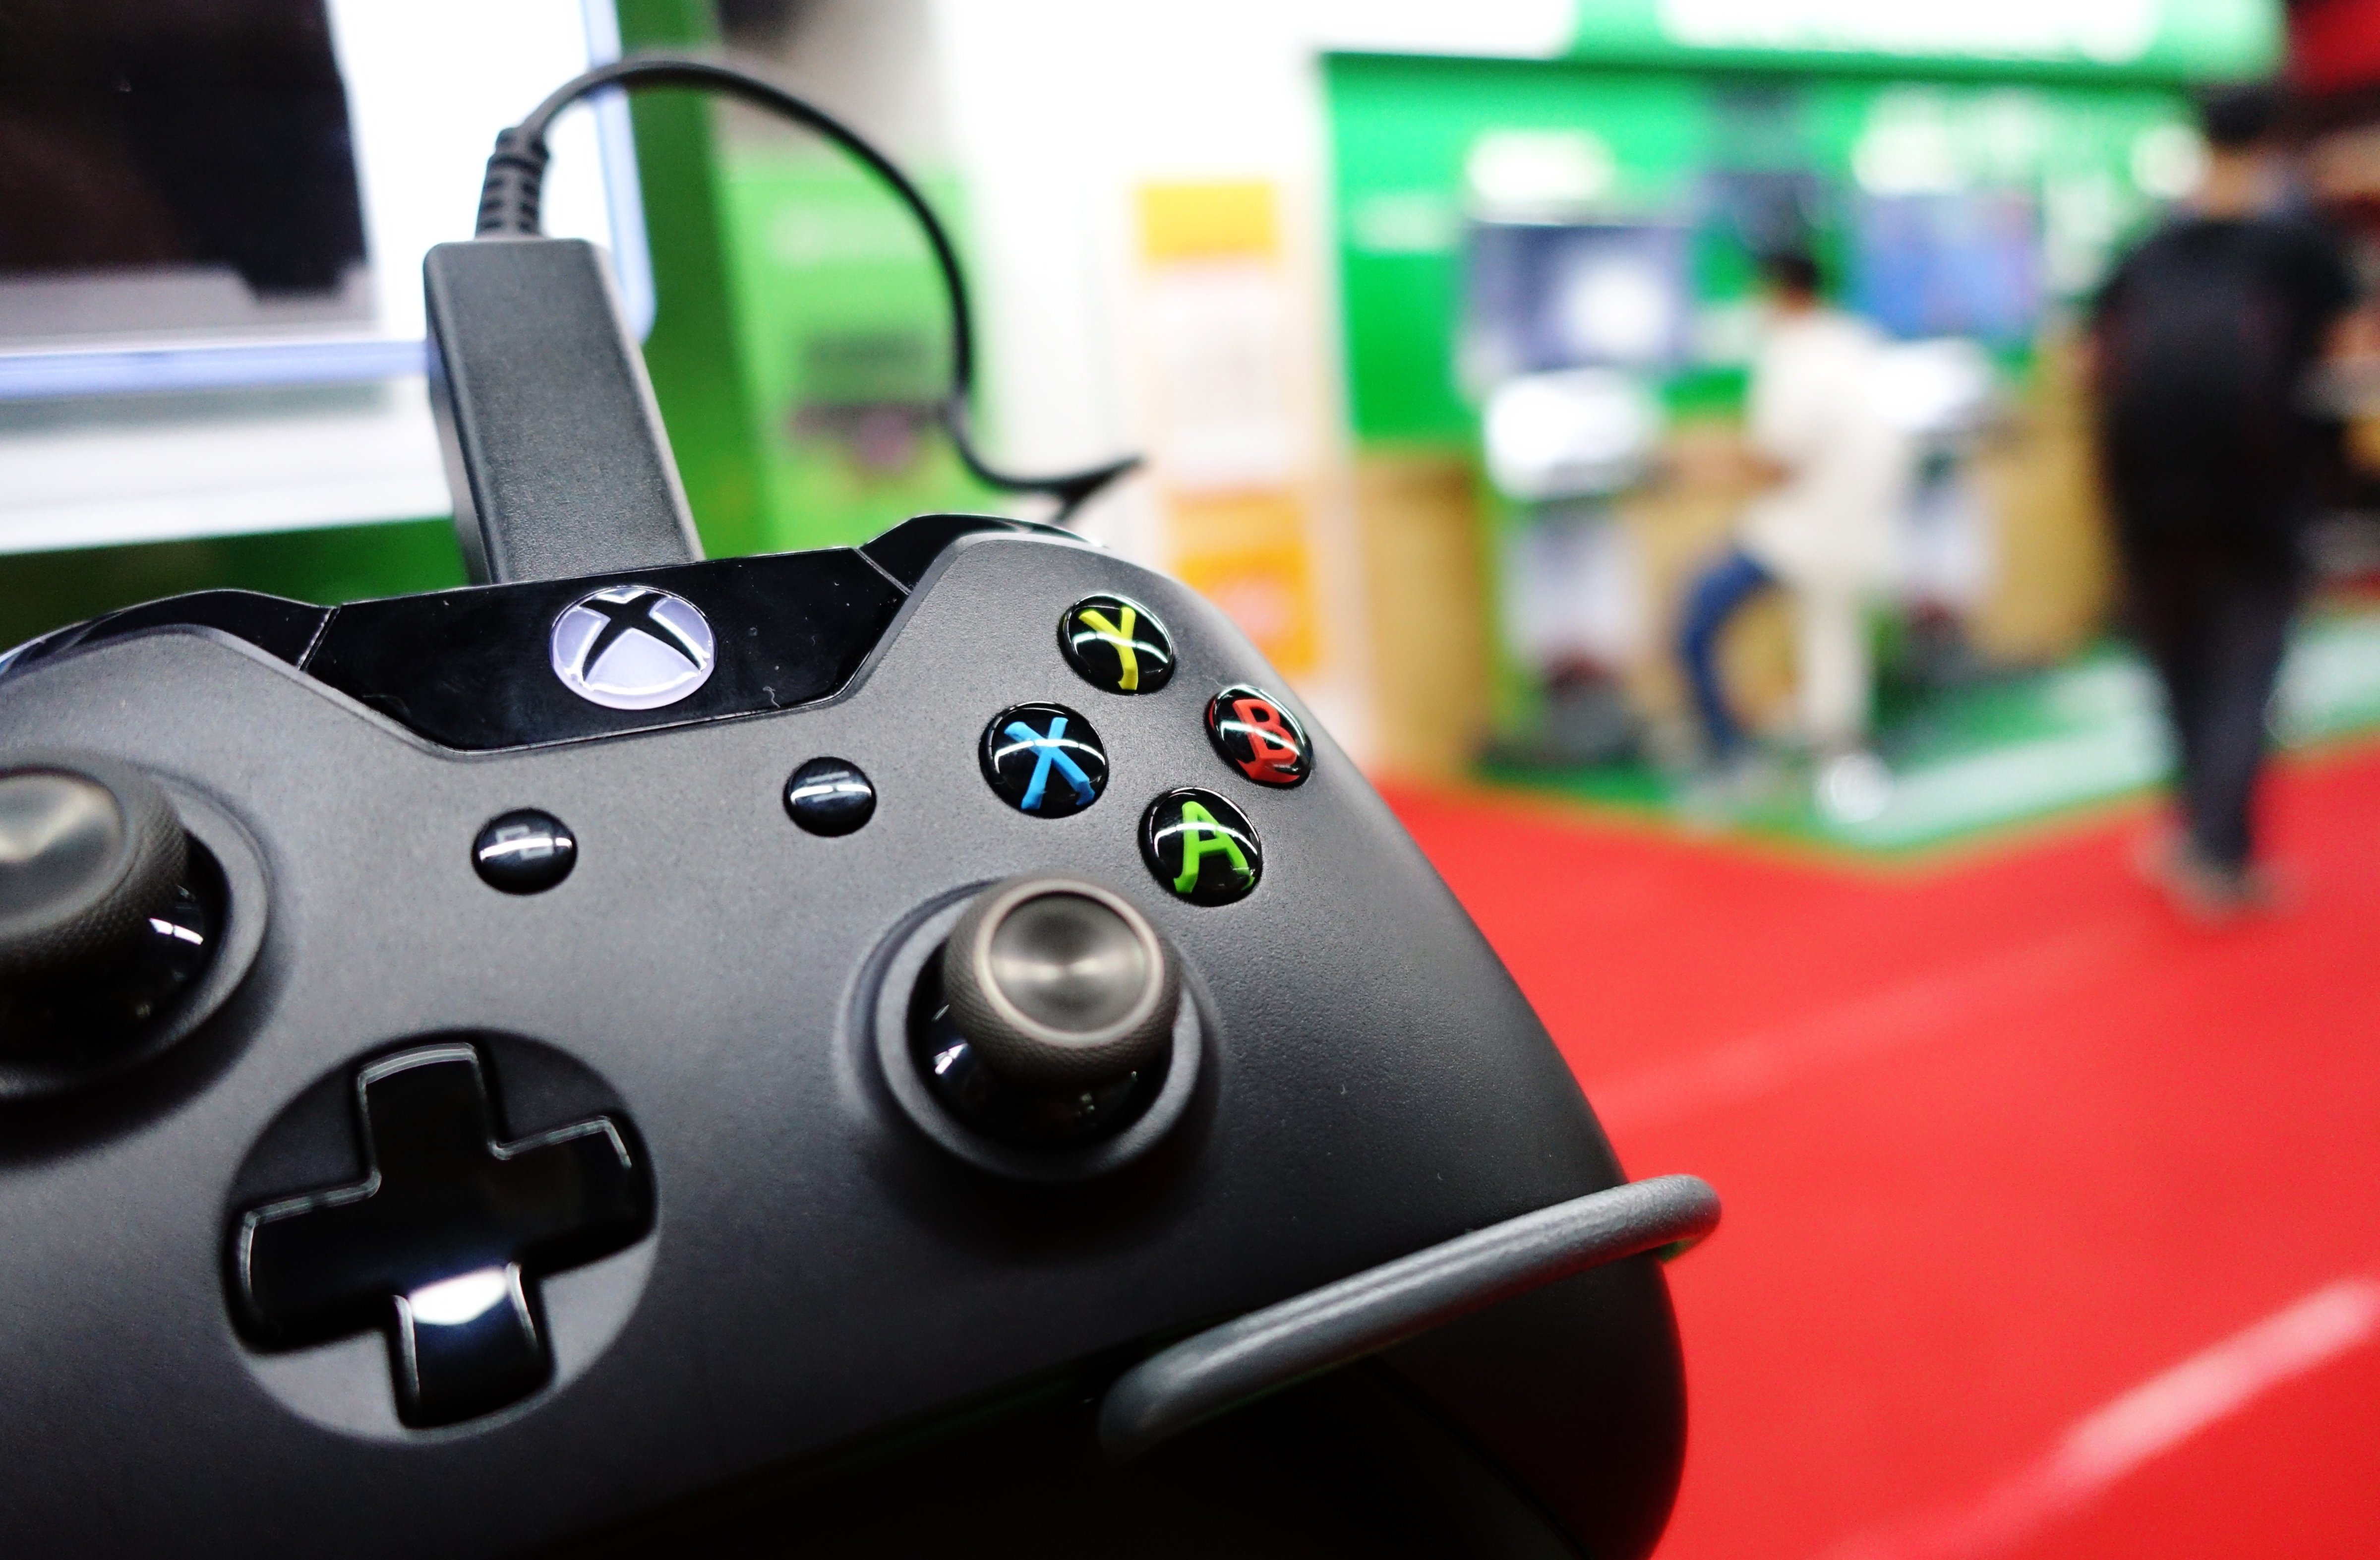 A control of a Microsoft's Xbox One game console is pictured in a shop in Shanghai on September 29, 2014. (Johannes Eisele&mdash;AFP/Getty Images)